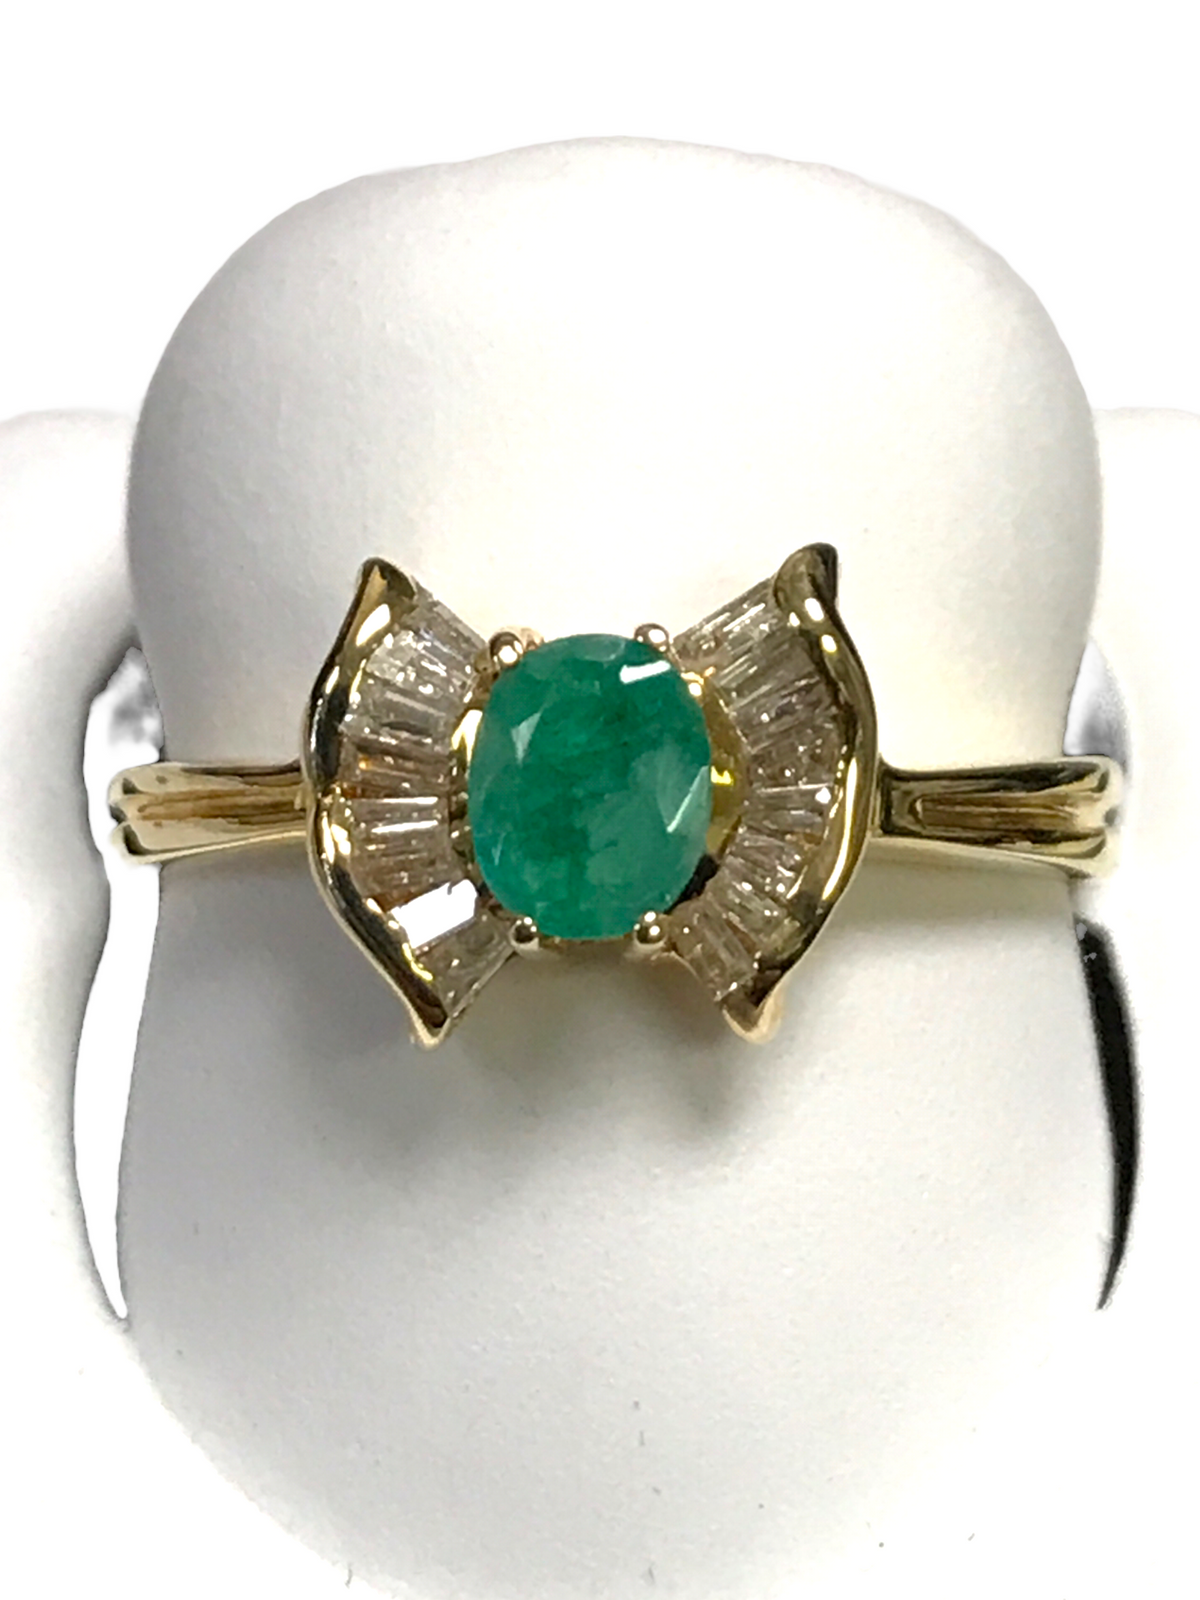 14k Yellow Gold Emerald and Diamond Ladies Ring Size 6.5(US)